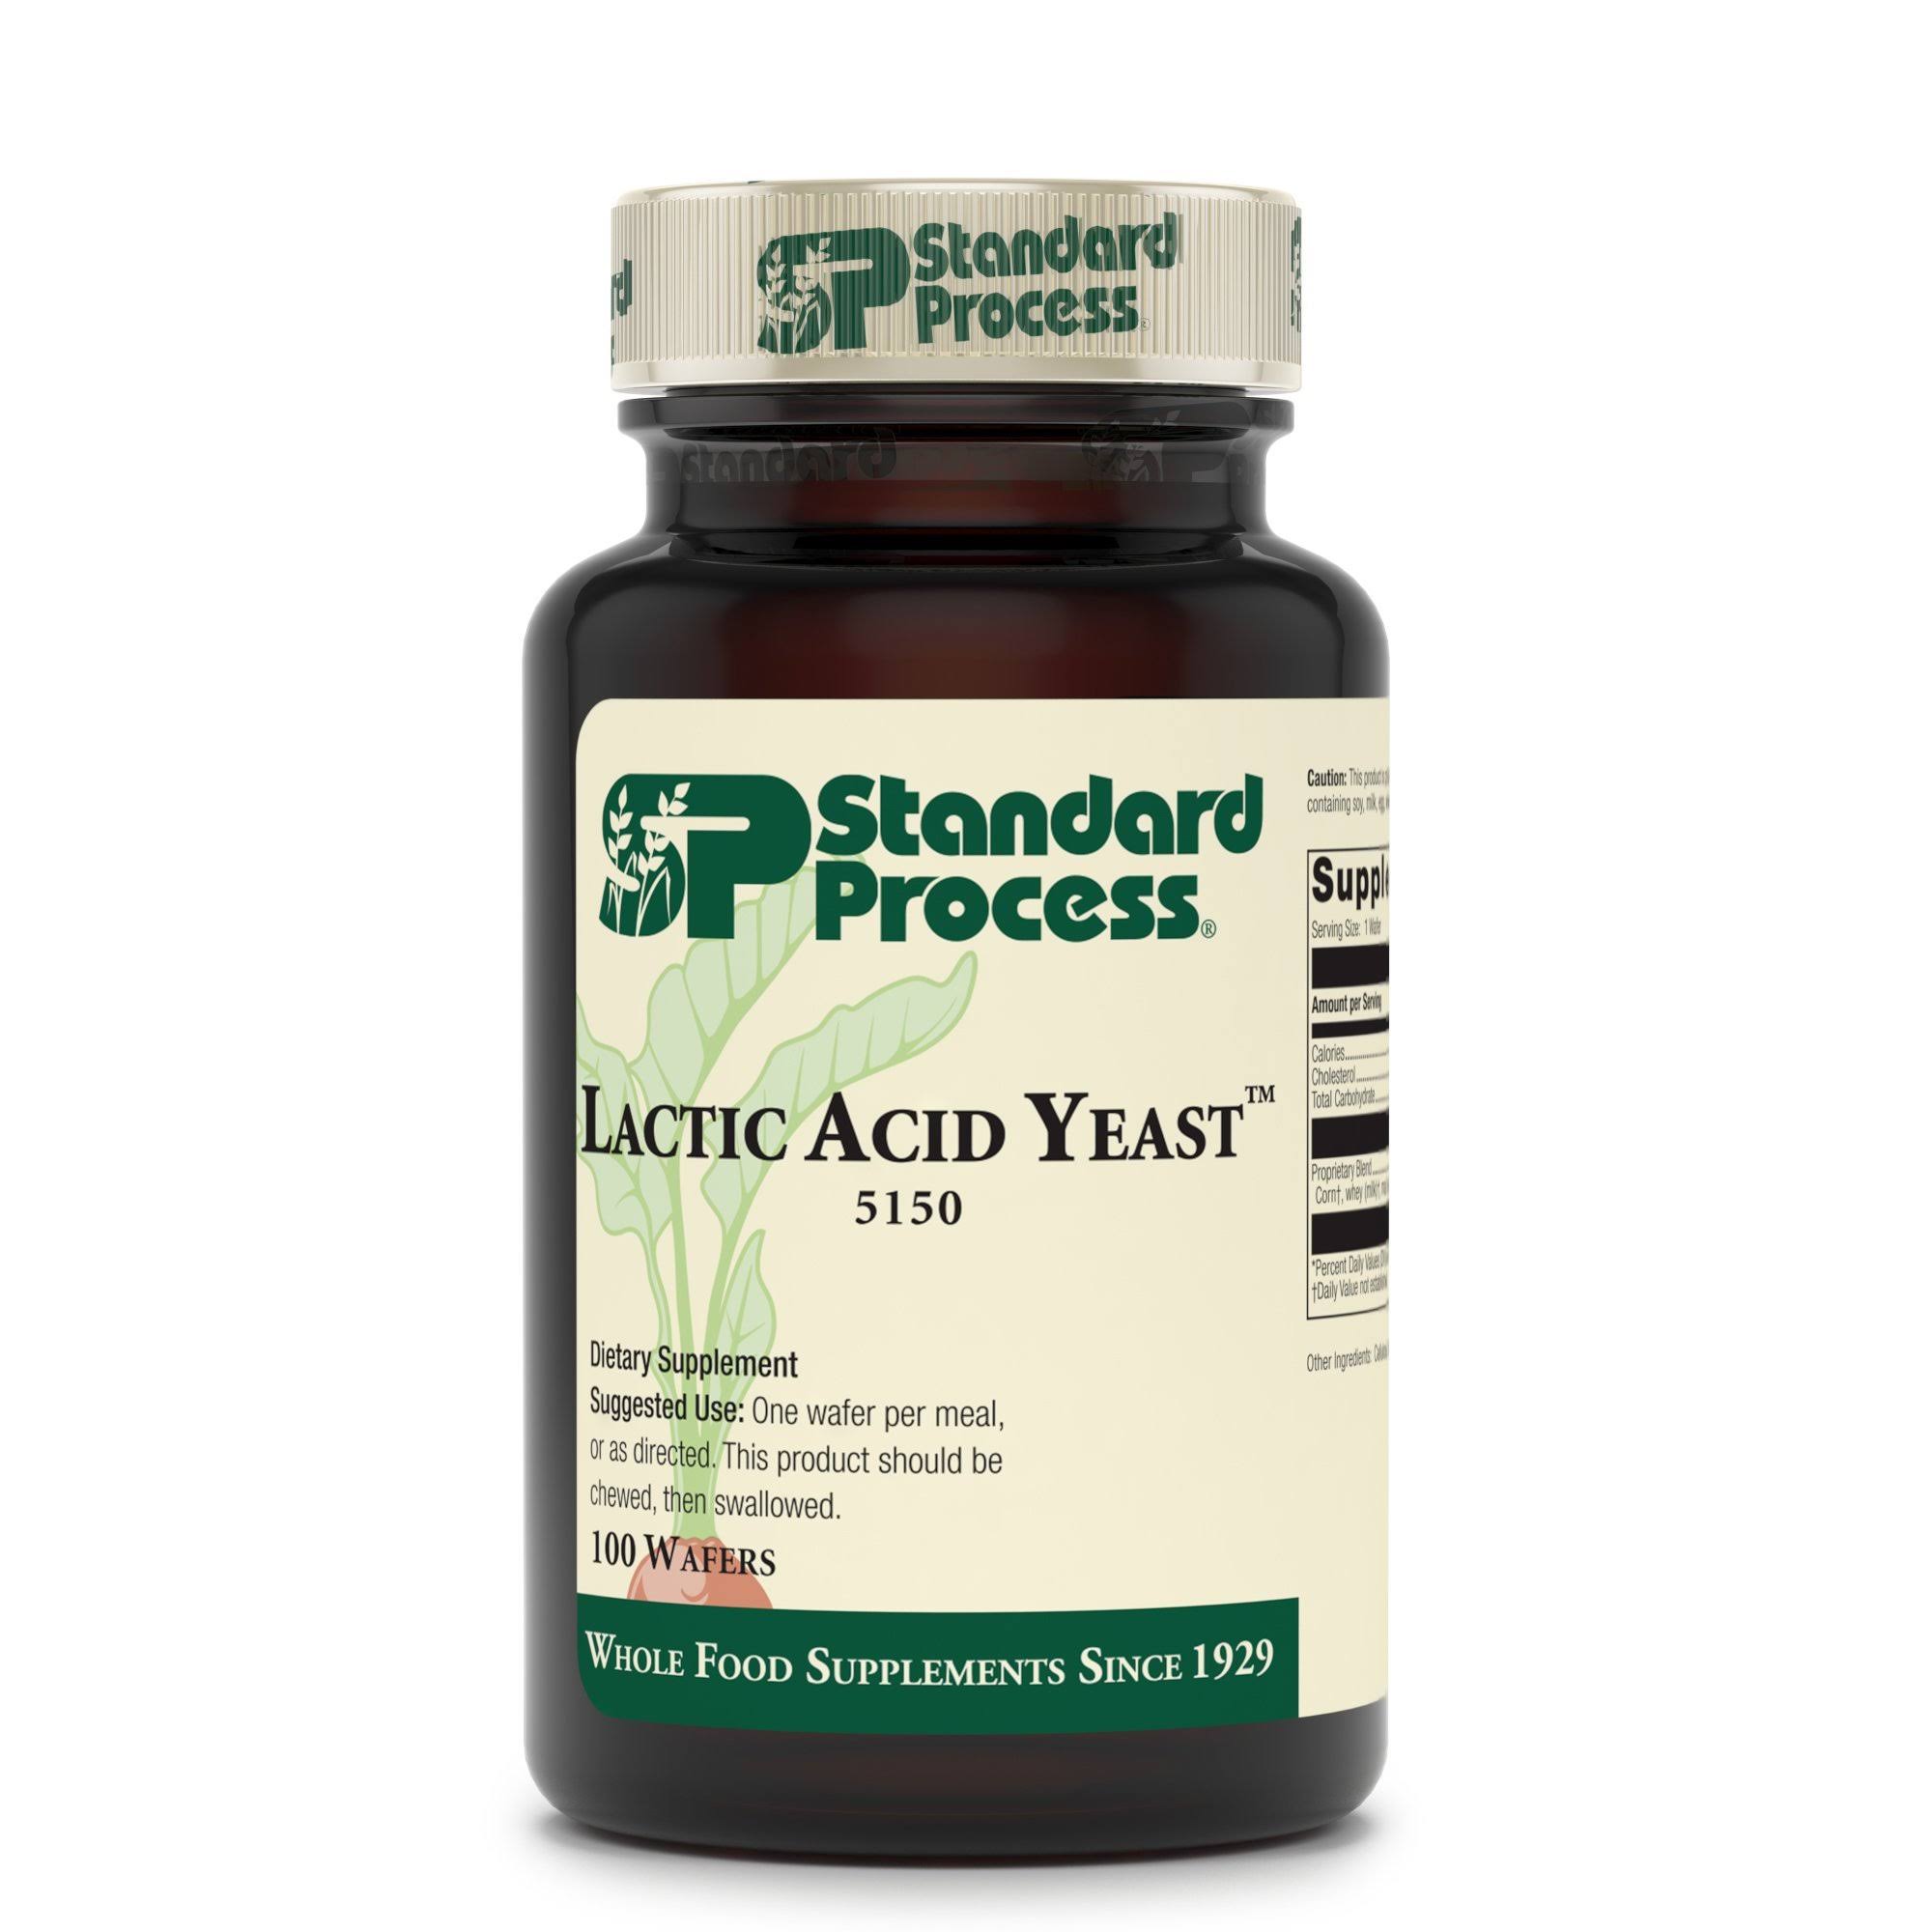 Standard Process - Lactic Acid Yeast - 100 Wafers